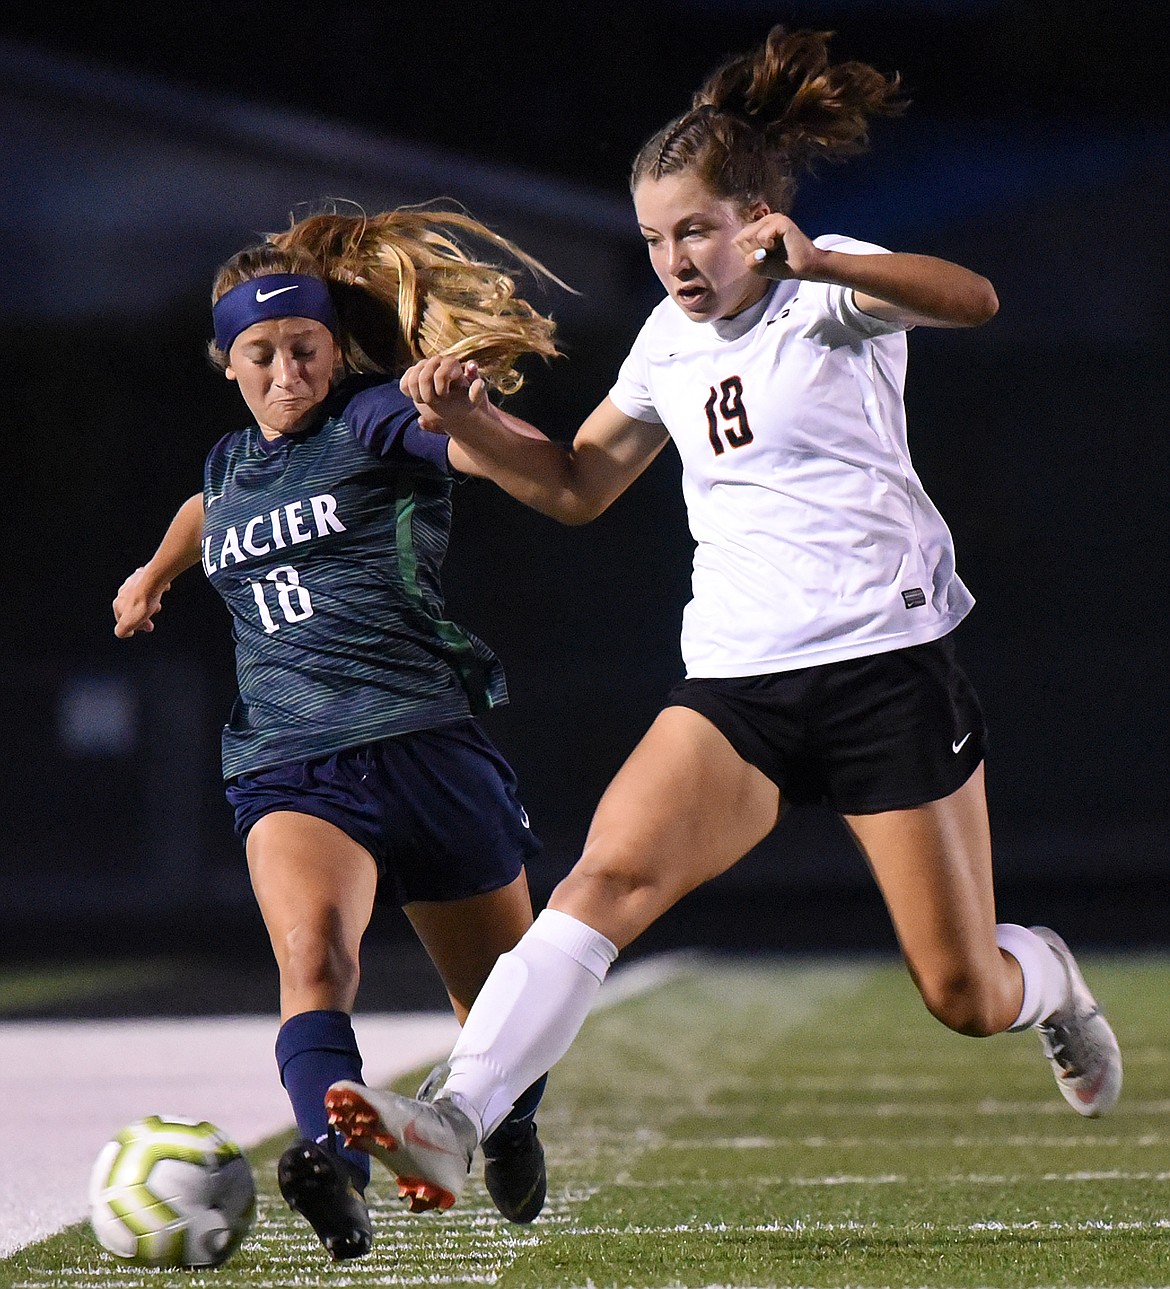 Glacier's Madison Becker (18) and Flathead's Bridget Crowley (19) battle for a ball in the first half during crosstown soccer at Legends Stadium on Thursday. (Casey Kreider/Daily Inter Lake)